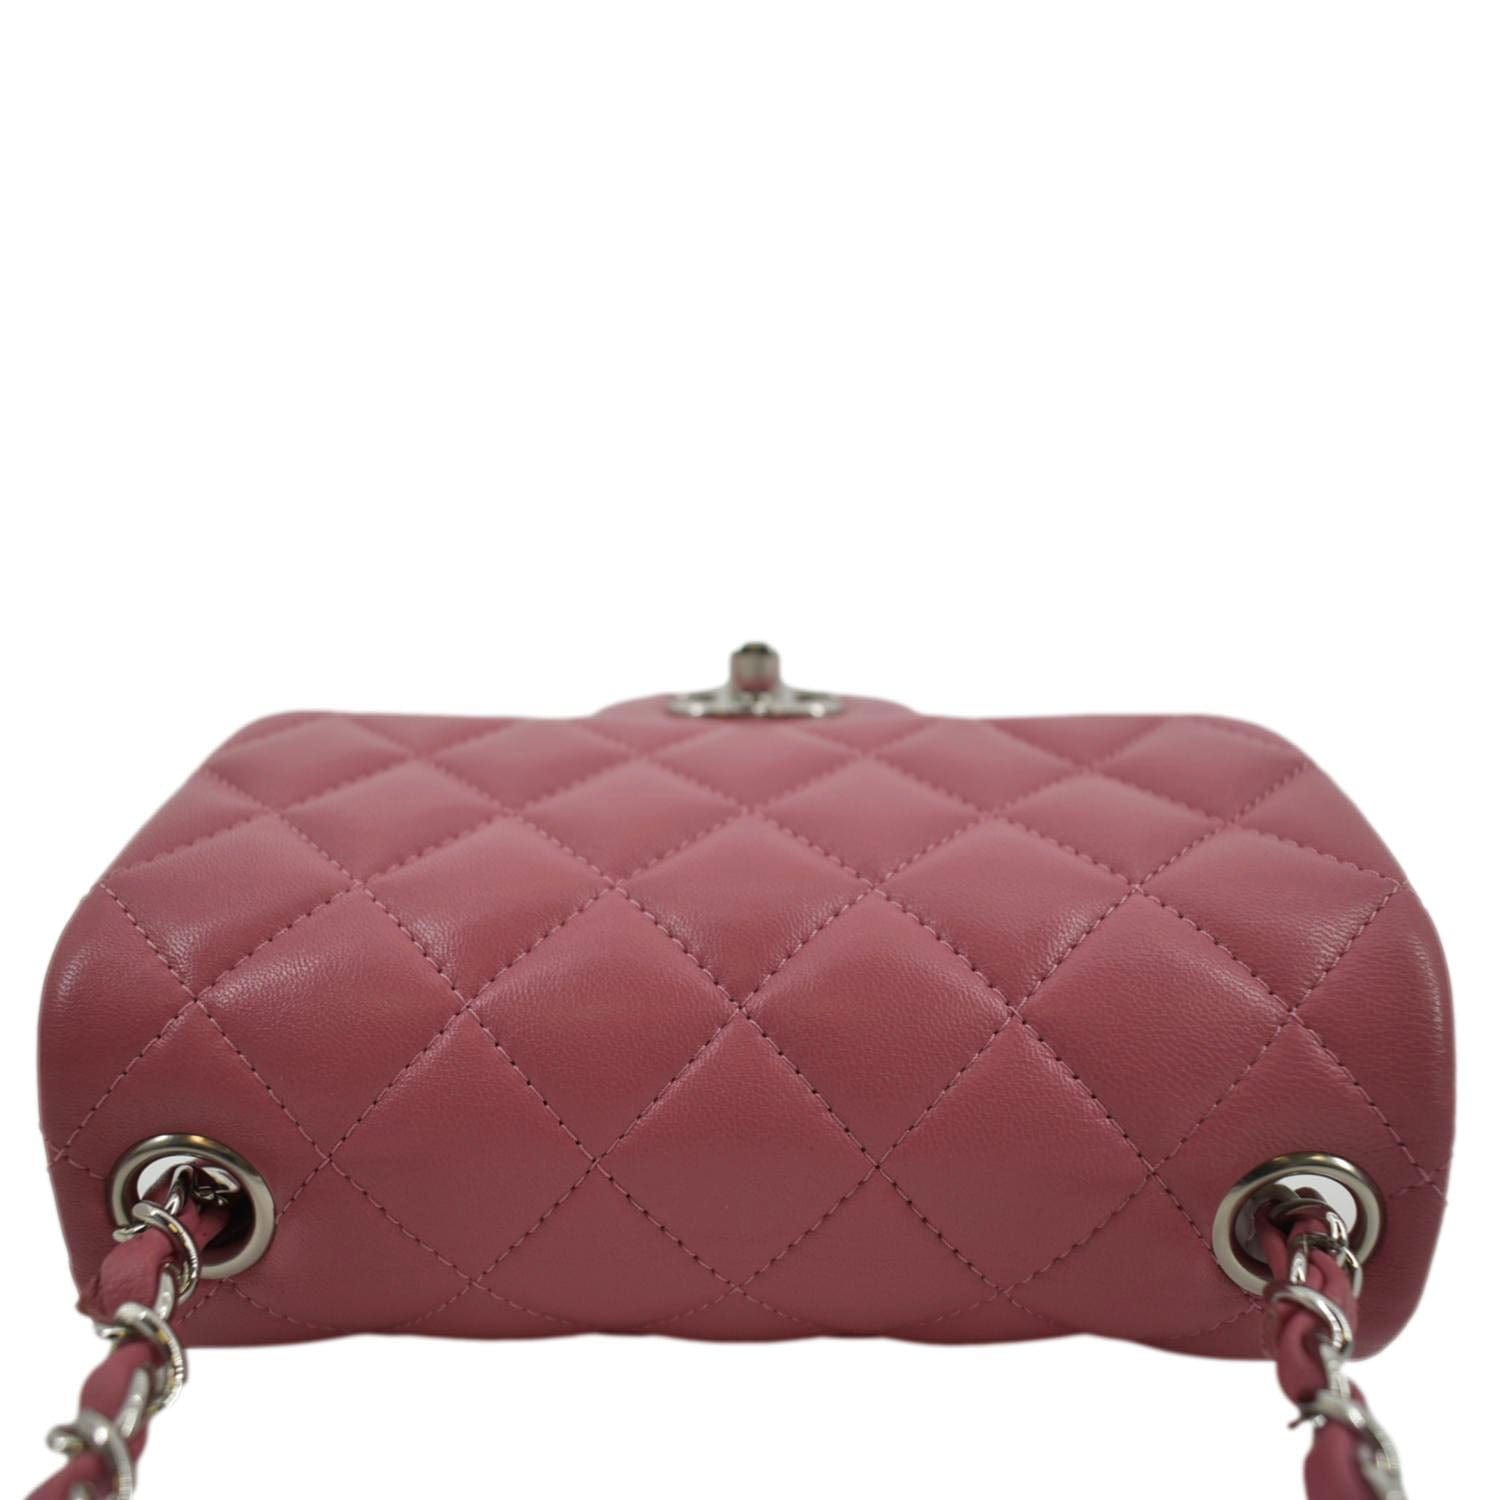 Chanel Timeless medium handbag in pink quilted leather and silver hardware